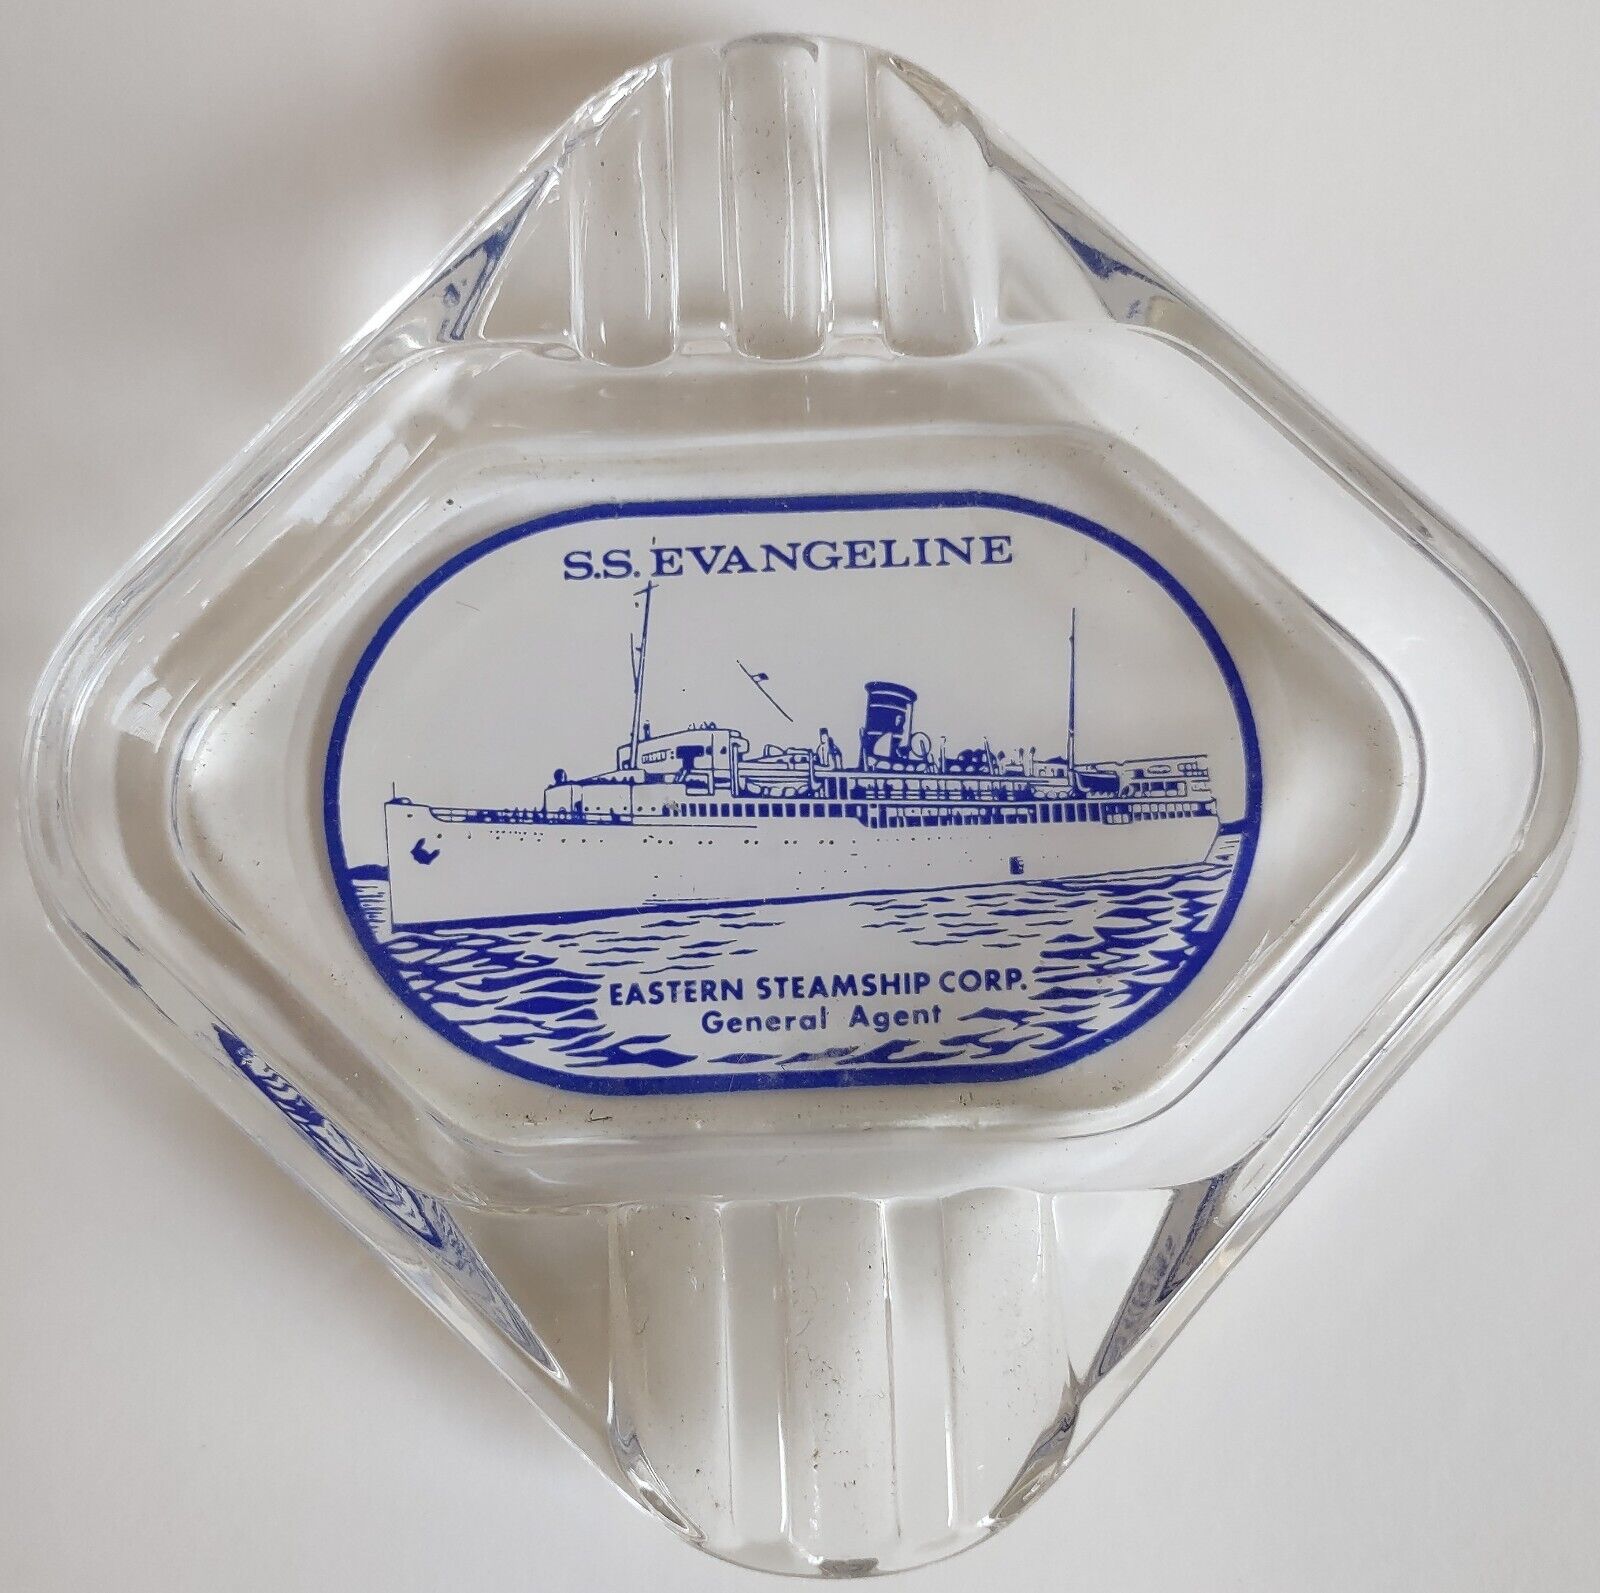 VINTAGE EASTERN STEAMSHIP CORP. CRUISE SHIP SS EVANGELINE GLASS ASHTRAY THICK